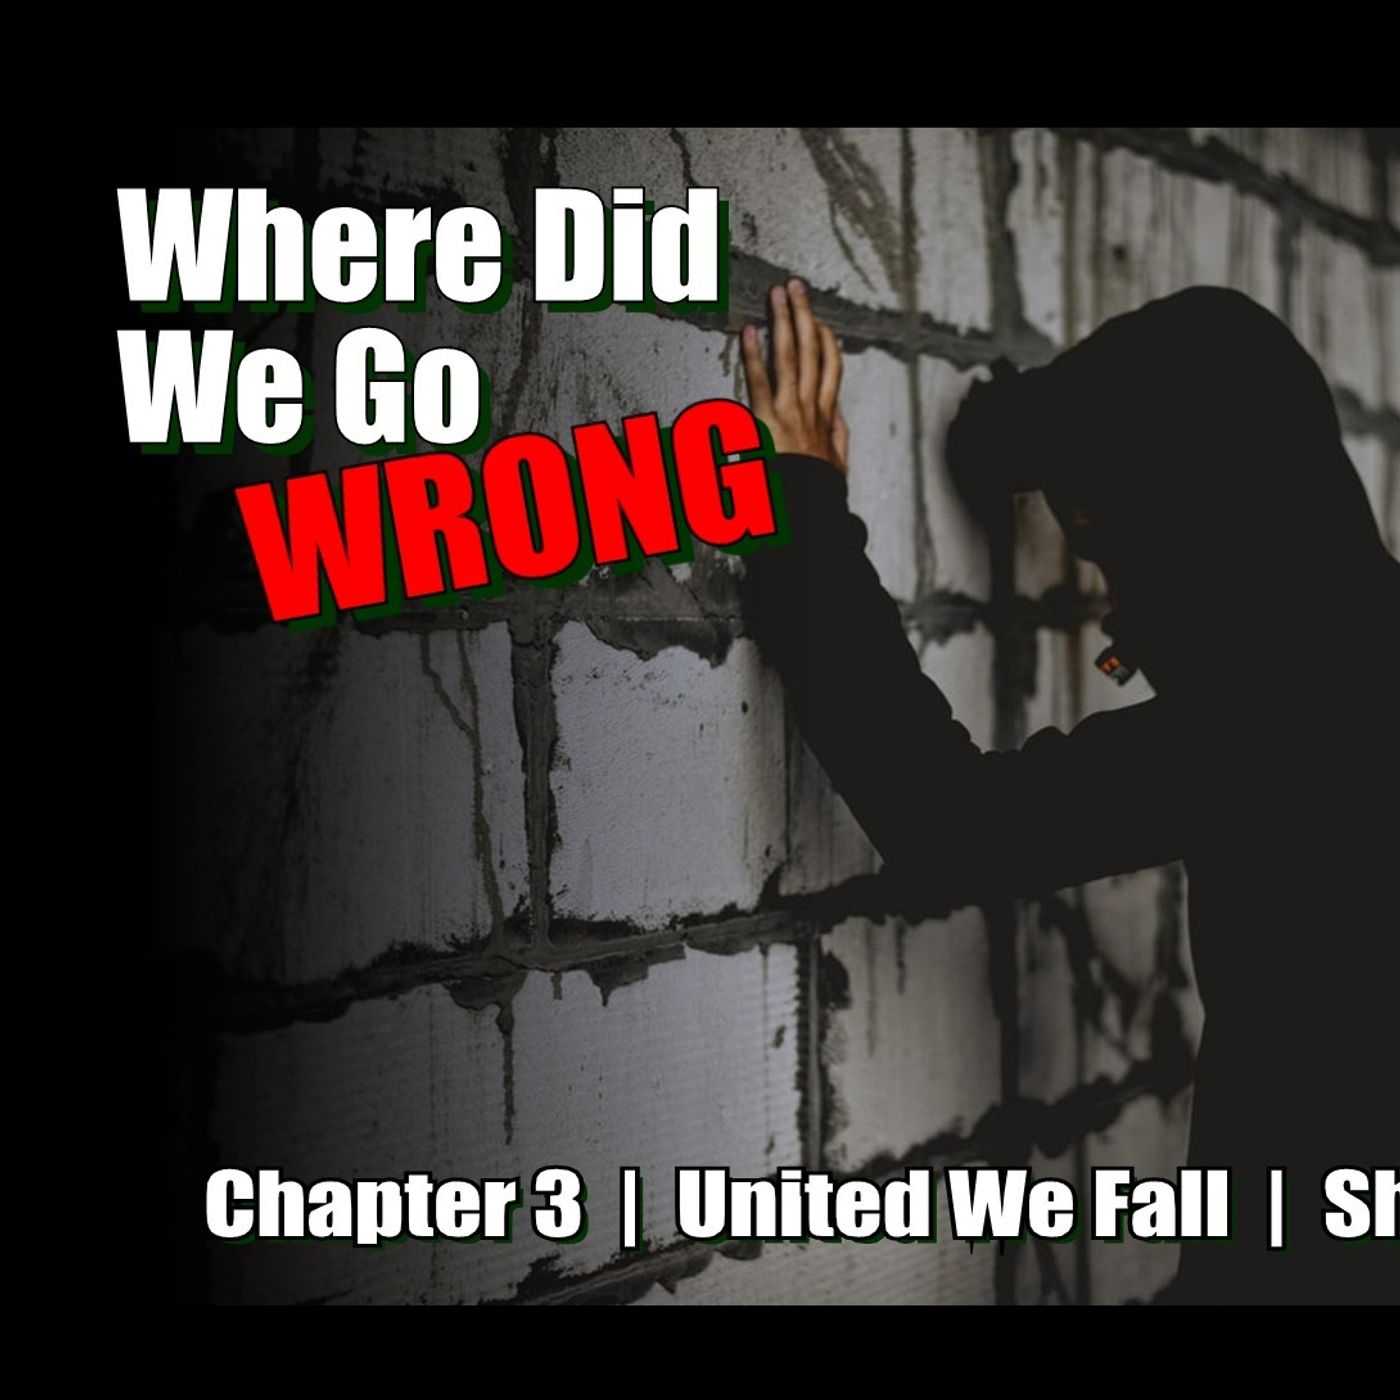 United We Fall - Chapter 3 - Where Did We Go Wrong